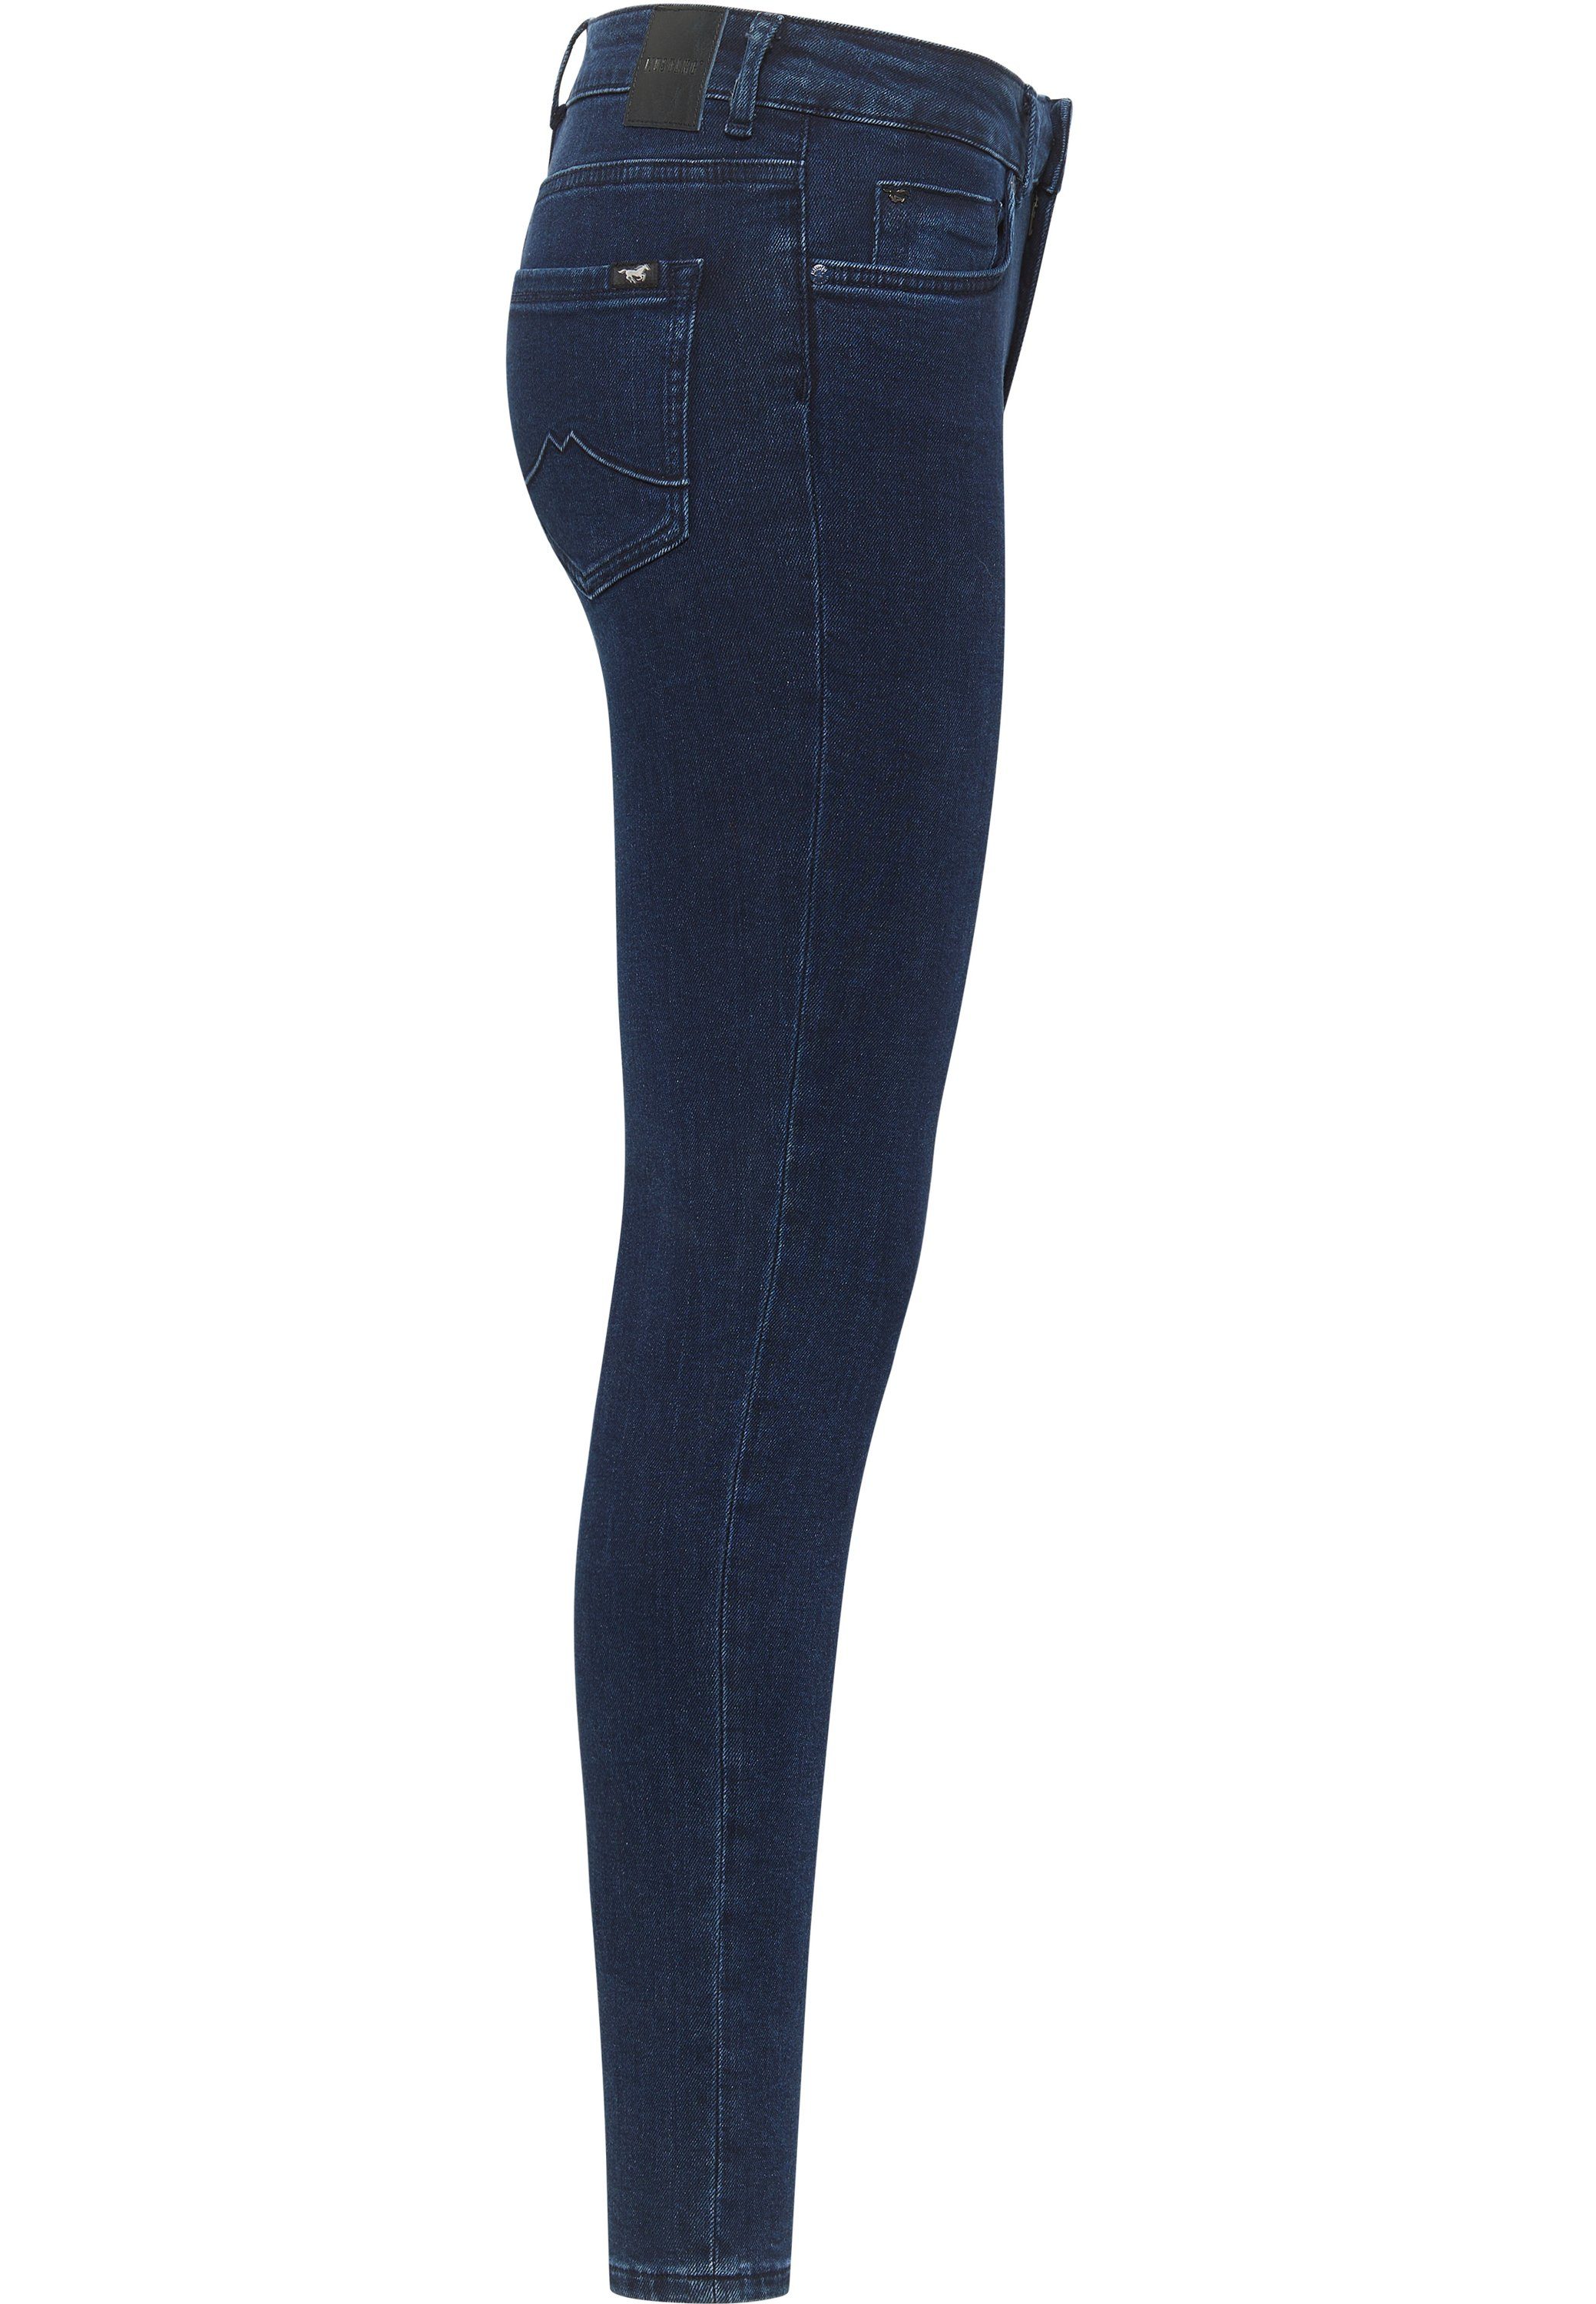 Mustang Skinny fit jeans Style Shelby Skinny